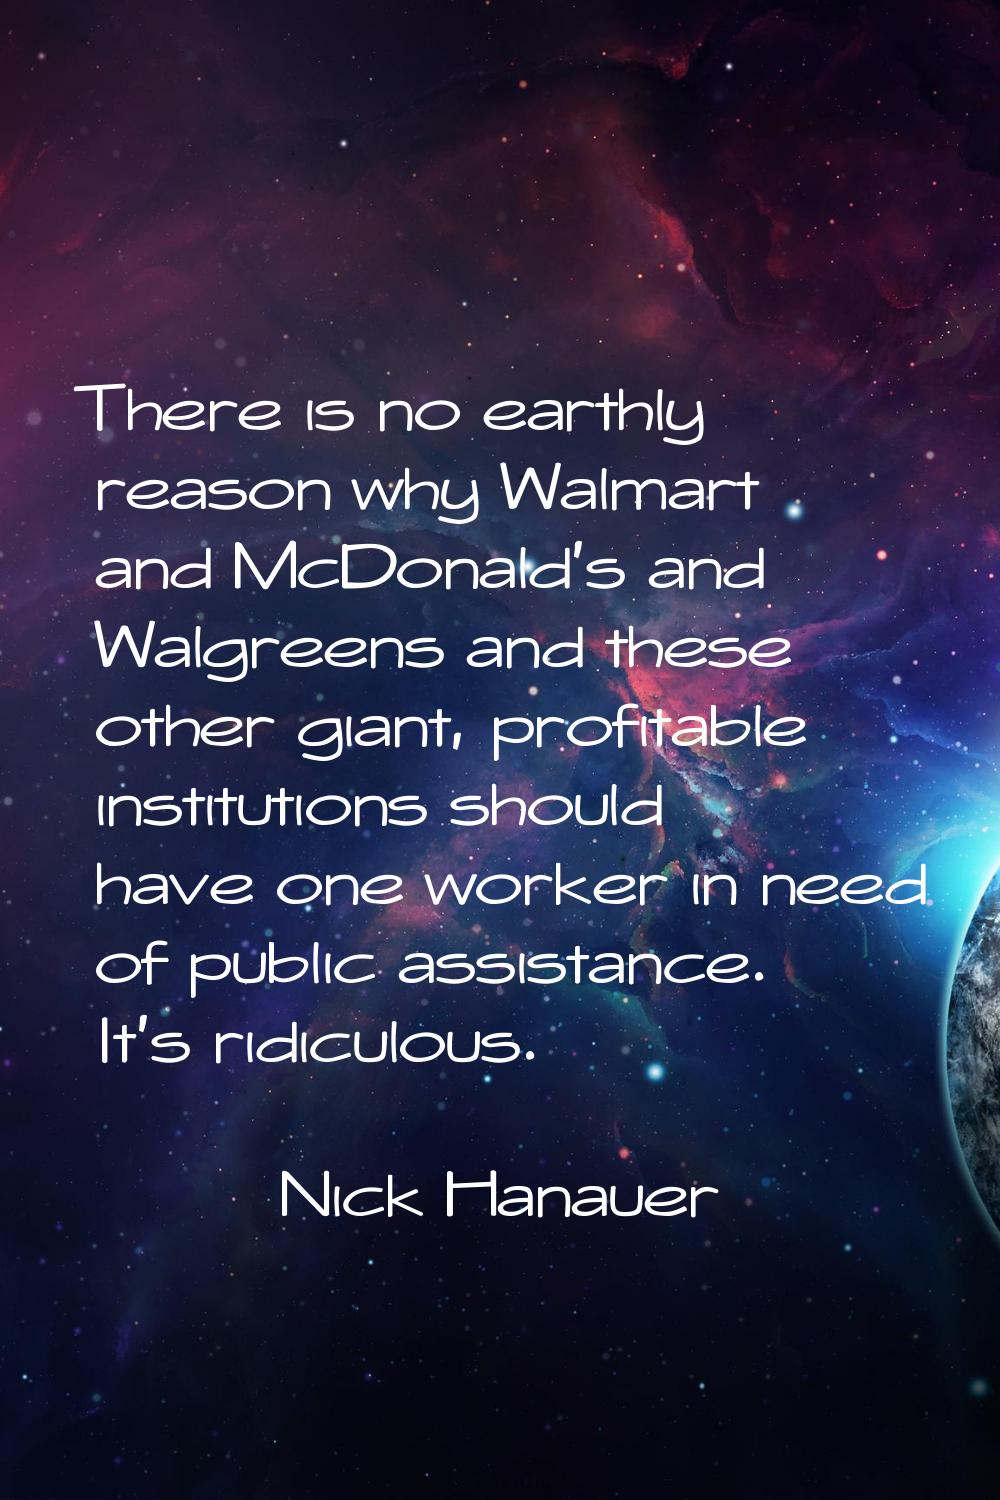 There is no earthly reason why Walmart and McDonald's and Walgreens and these other giant, profitab